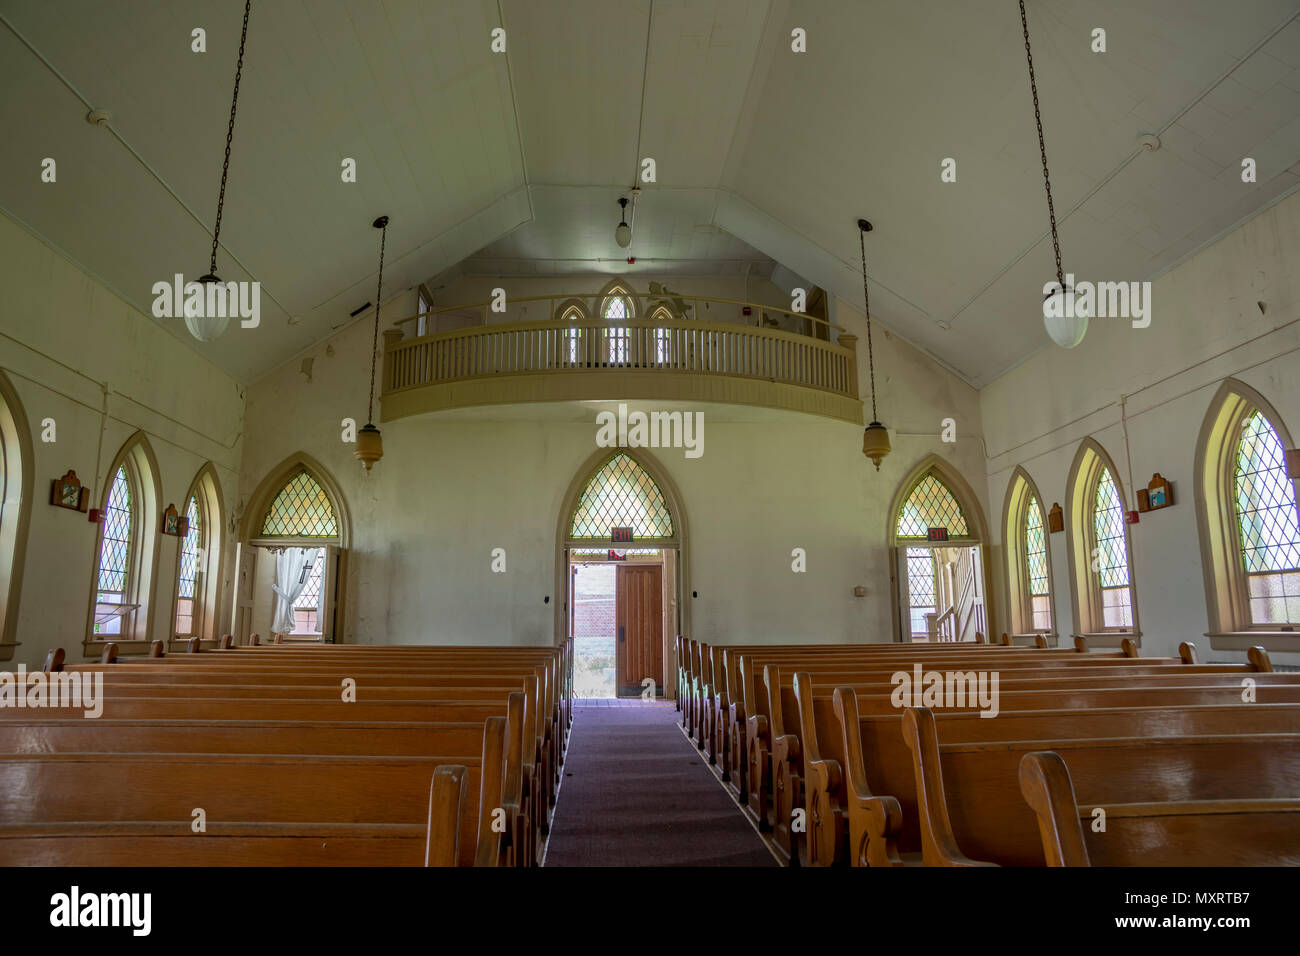 Interior of abandoned church with wooden pews inside prison yard. Stock Photo